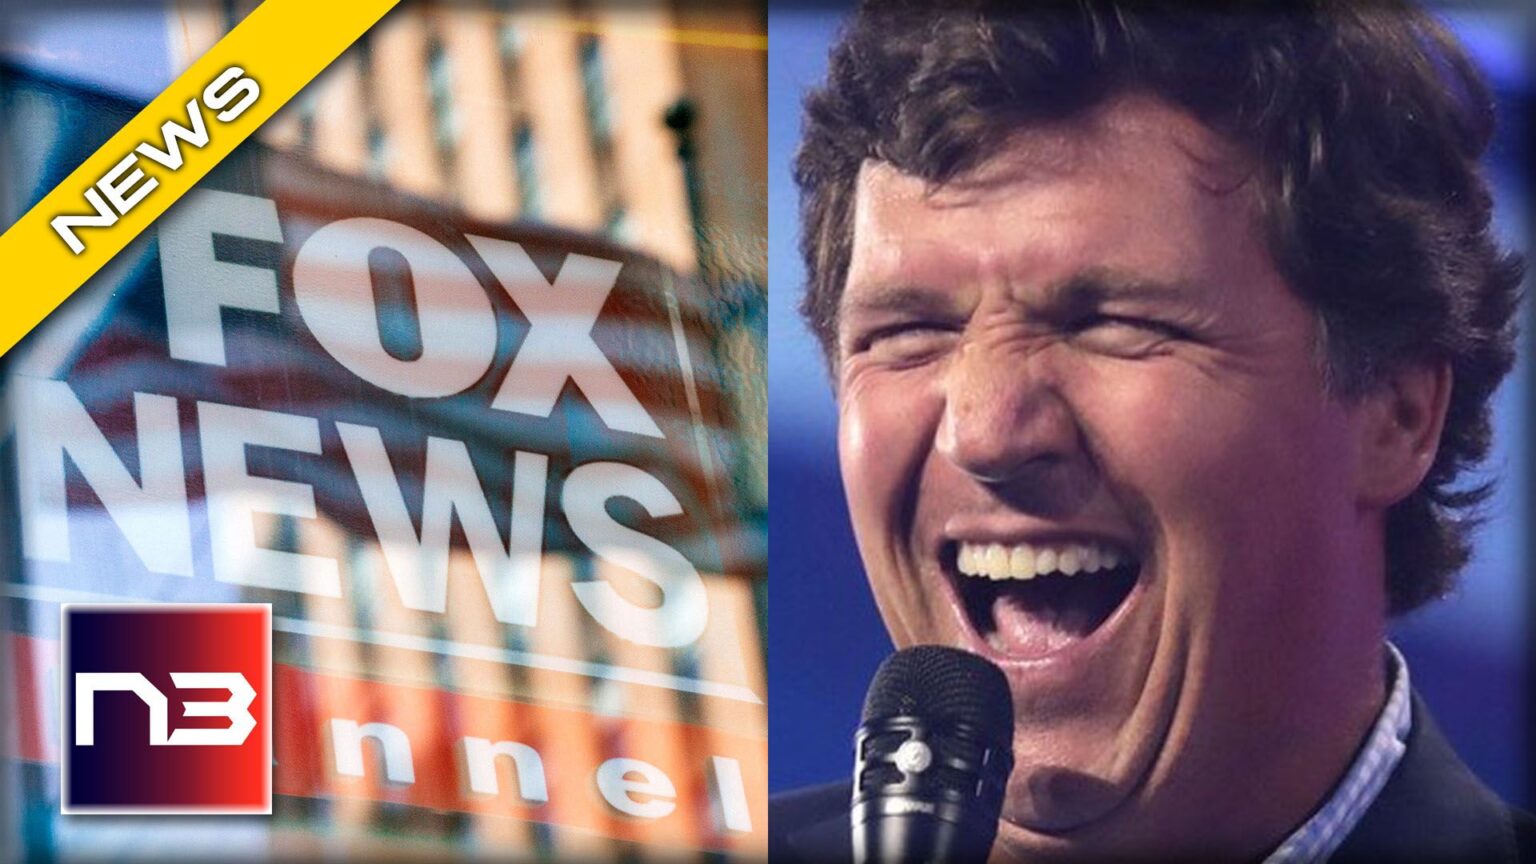 Downfall Of Fox News Lawsuits And Ratings Plunge Threaten Cable News Empire 2399